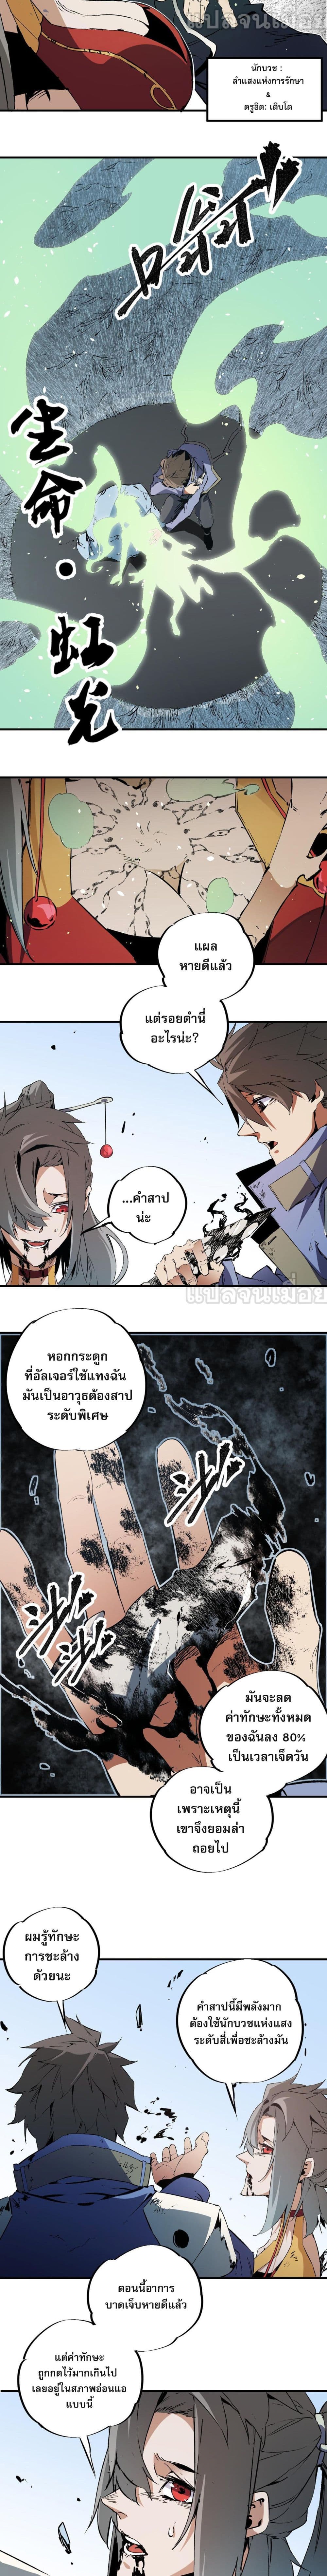 Job Changing for the Entire Population: The Jobless Me Will Terminate the Gods ฉันคือผู้เล่นไร้อาชีพที่สังหารเหล่าเทพ 70-70